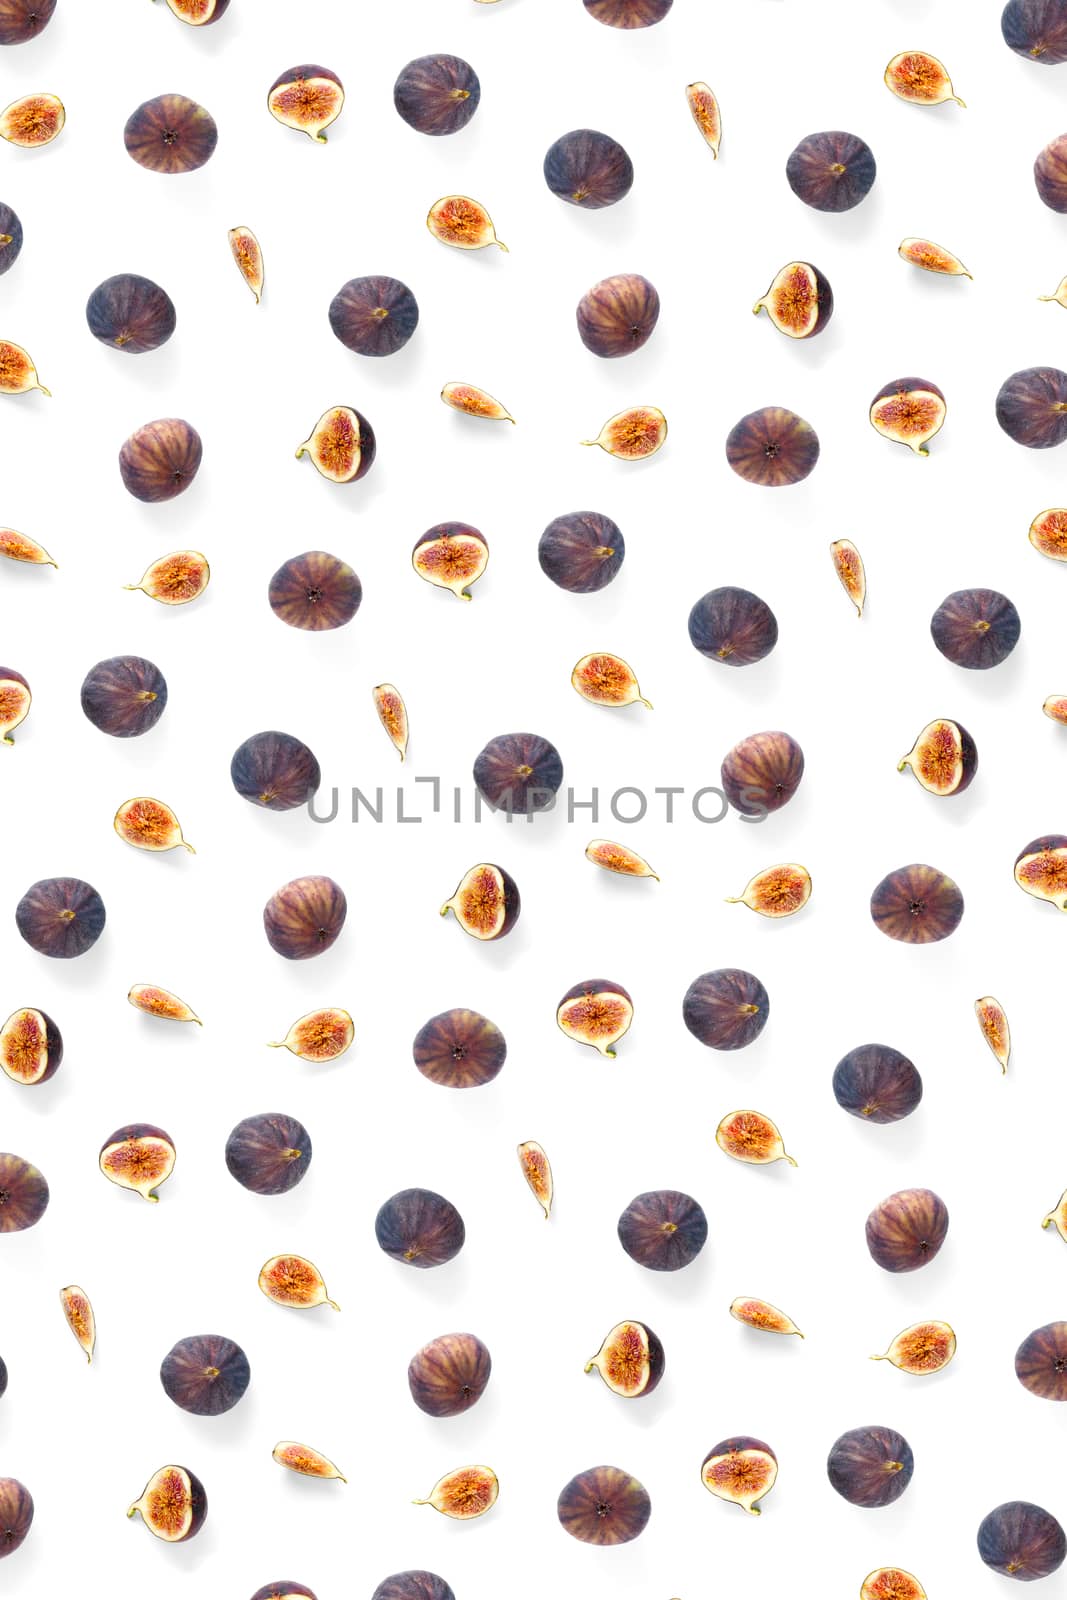 Background from Fresh figs. Food Photo. Modern fig fruits background. Creative set of the whole and sliced figs on a white background, not pattern